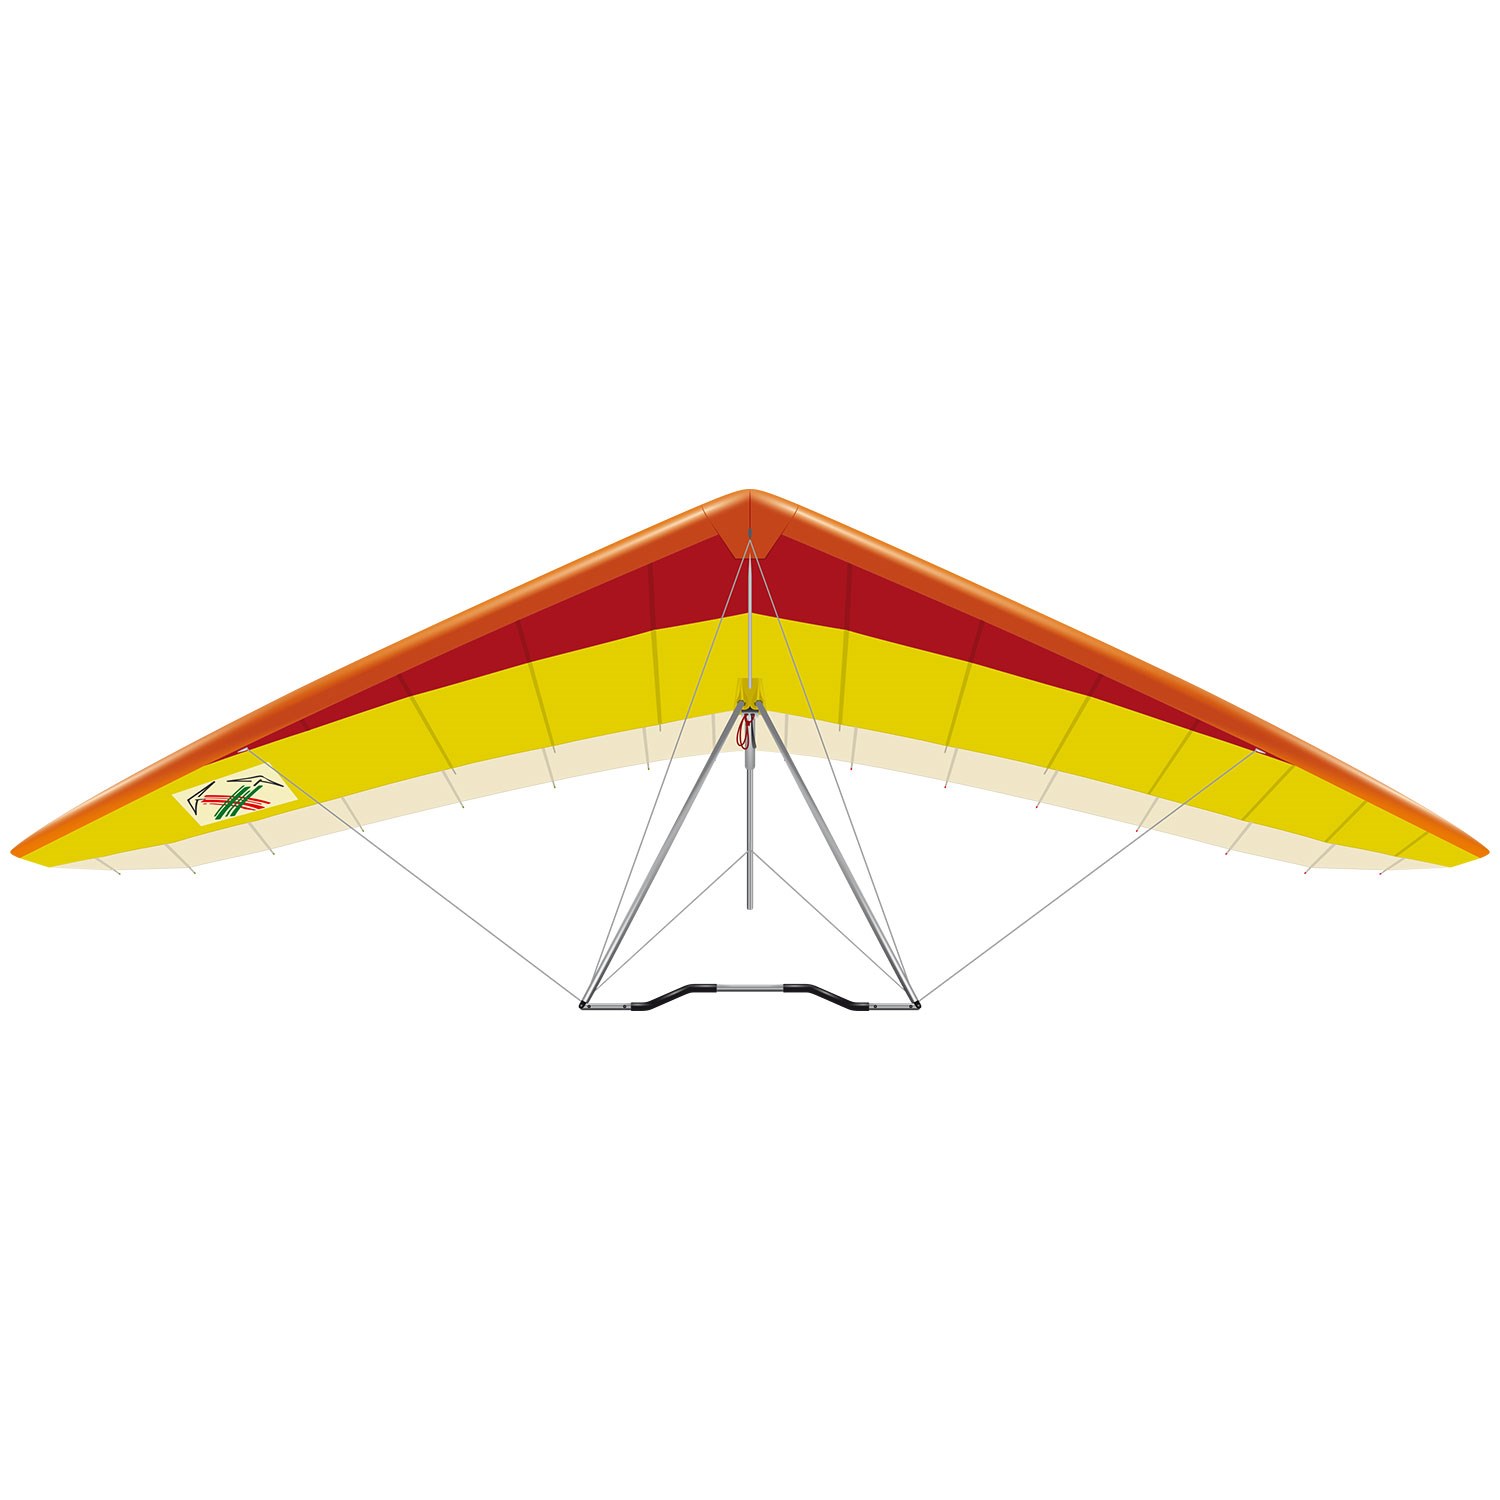 A red, yellow, and white Airwave Magic Kiss hang glider. 